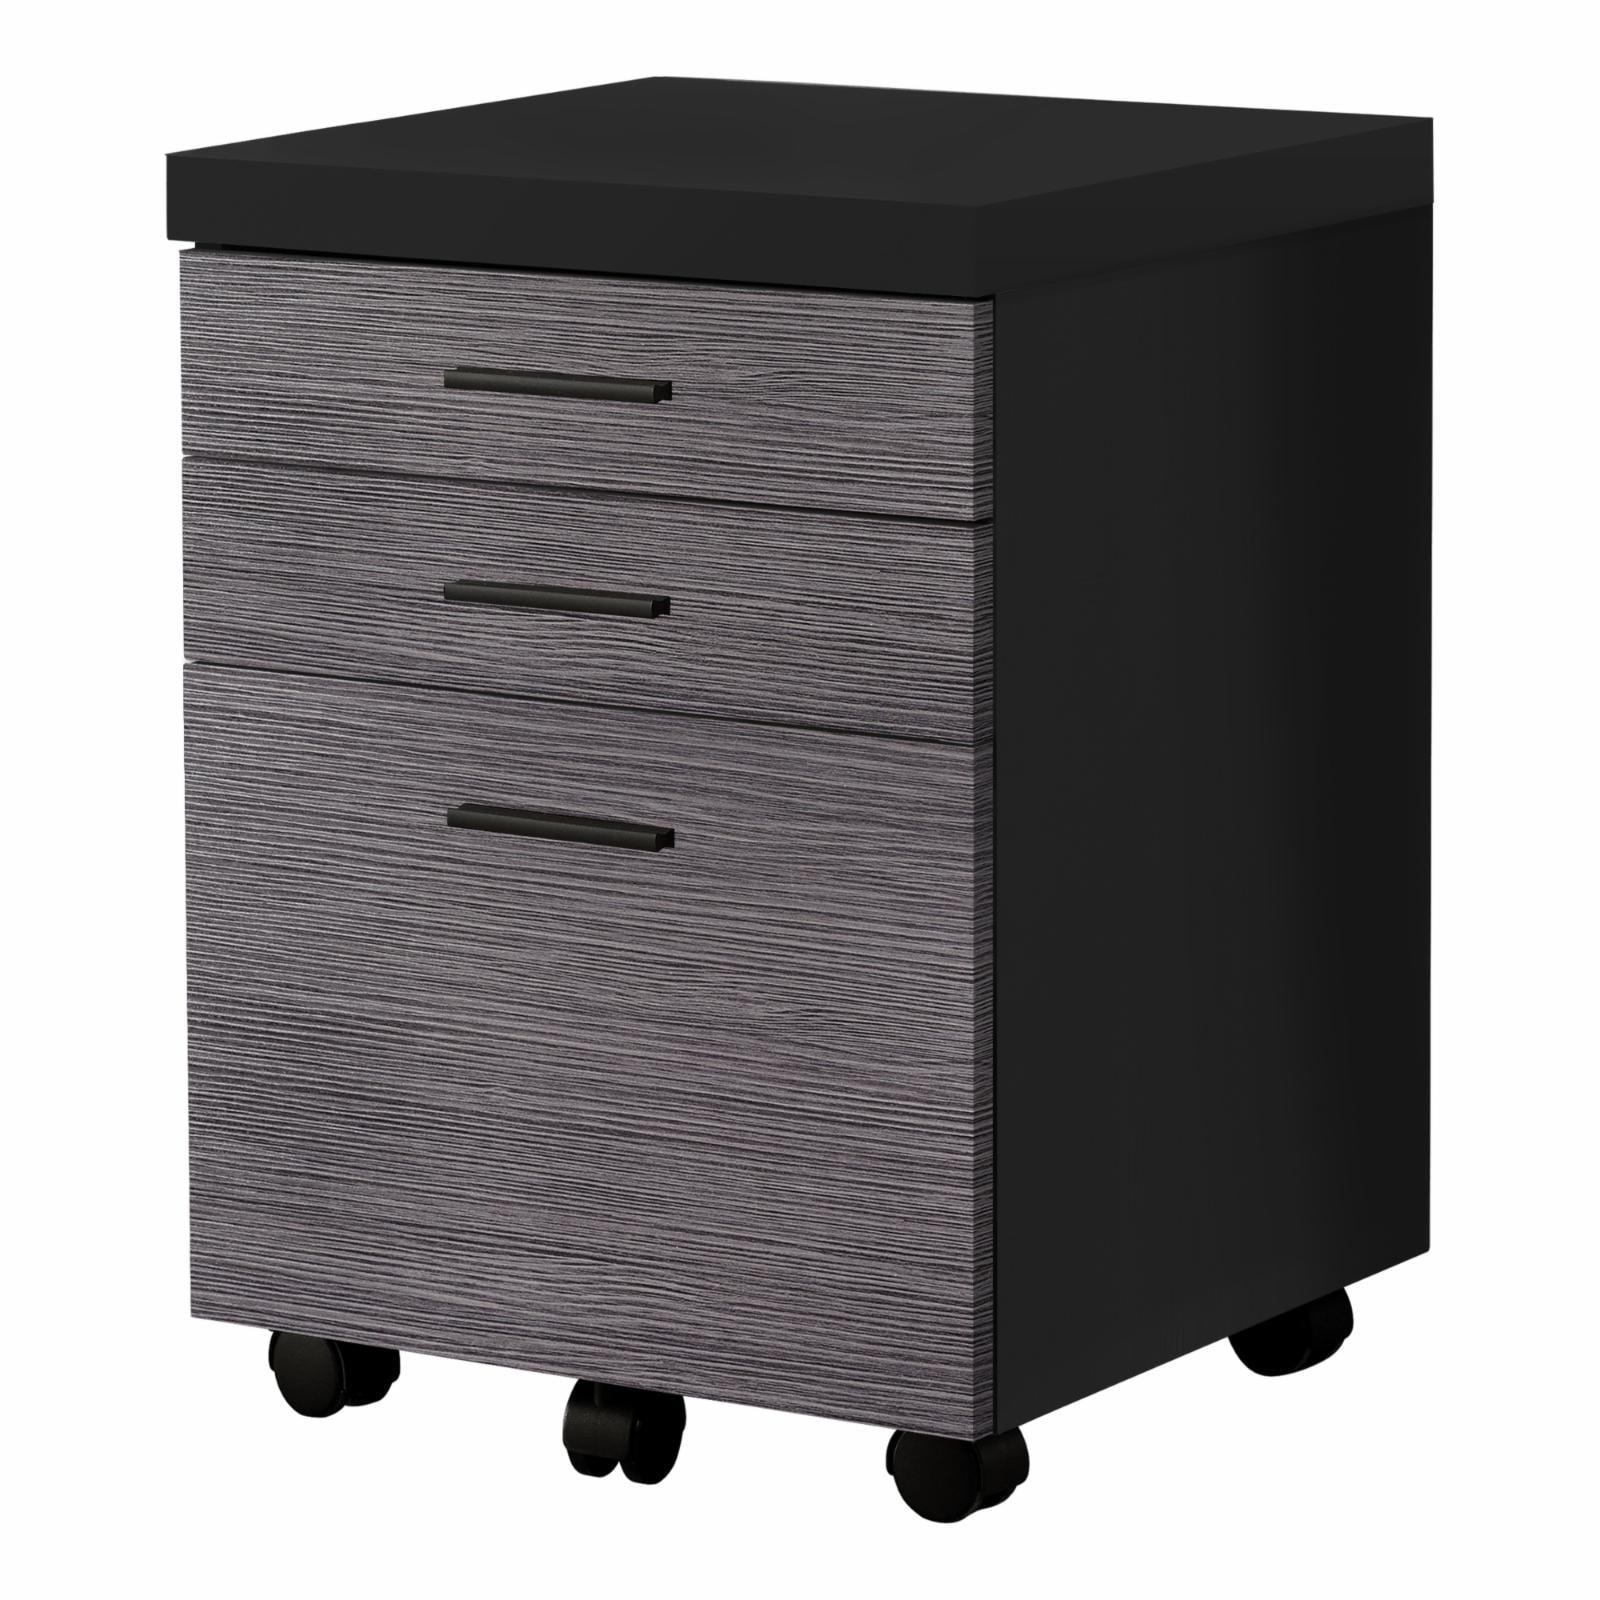 Black and Gray 3-Drawer Mobile Filing Cabinet